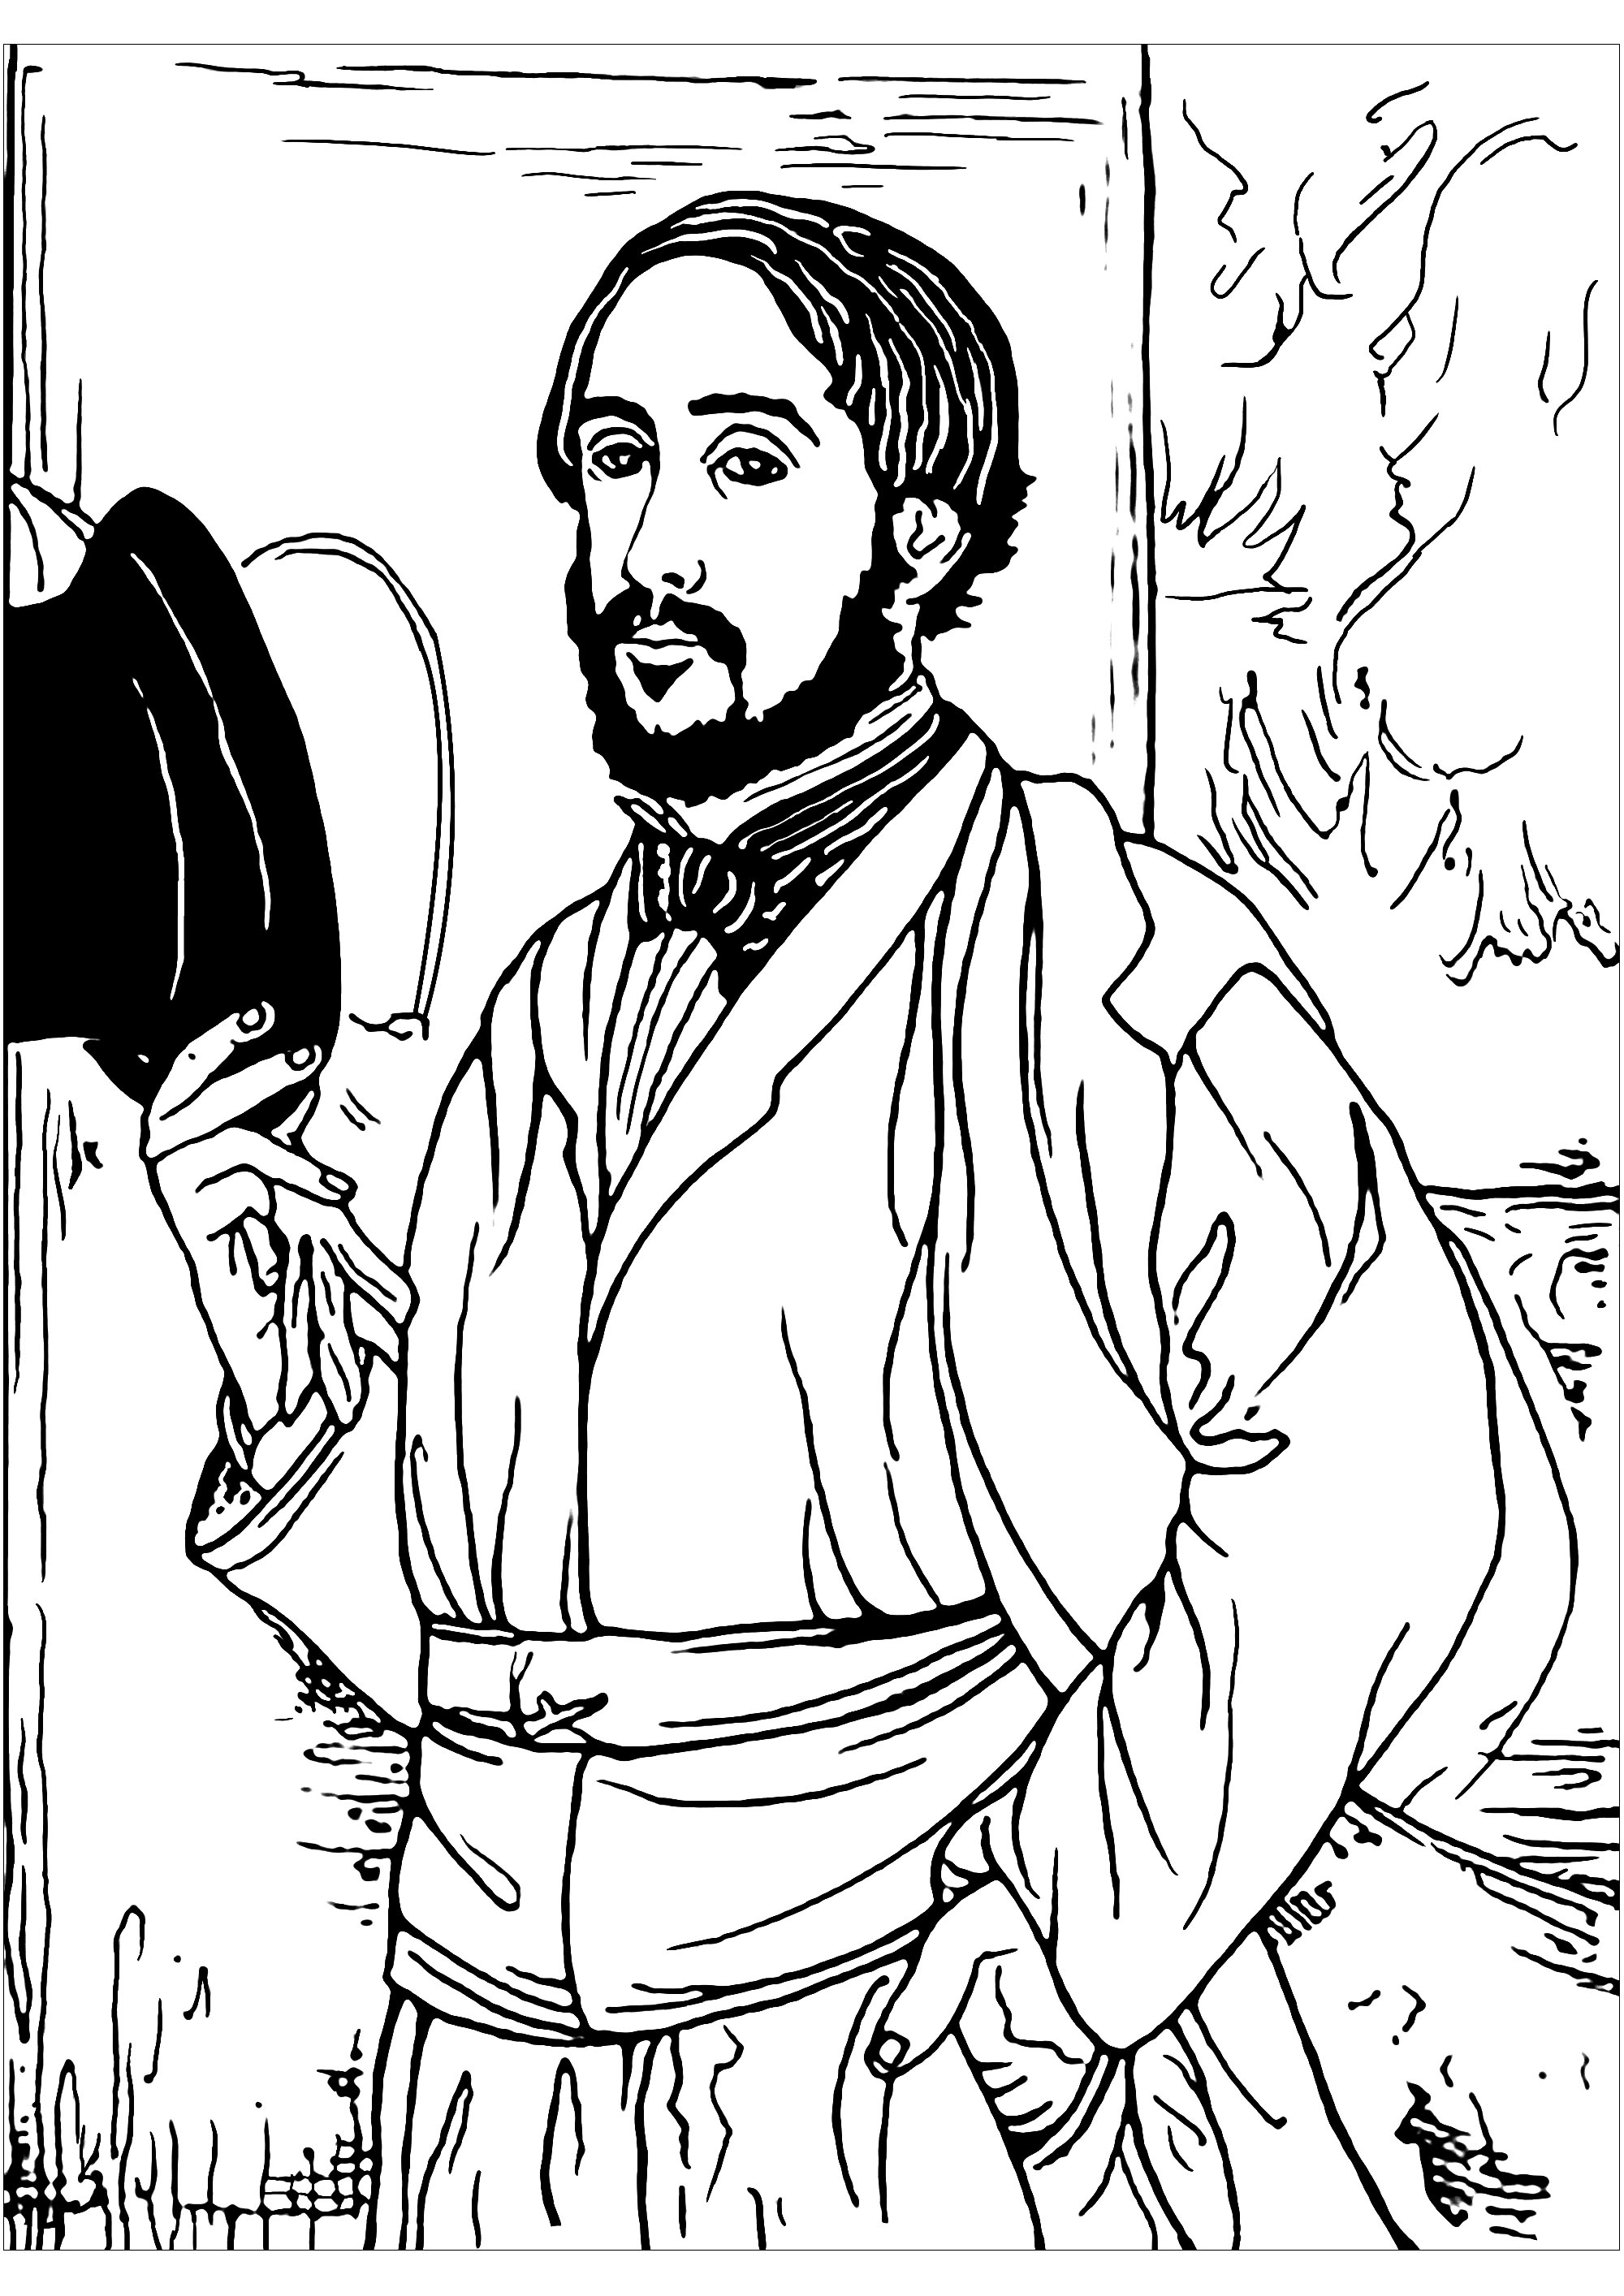 A Self-portrait of Edgar Degas (French artist famous for his paintings, sculptures, prints, and drawings) to color